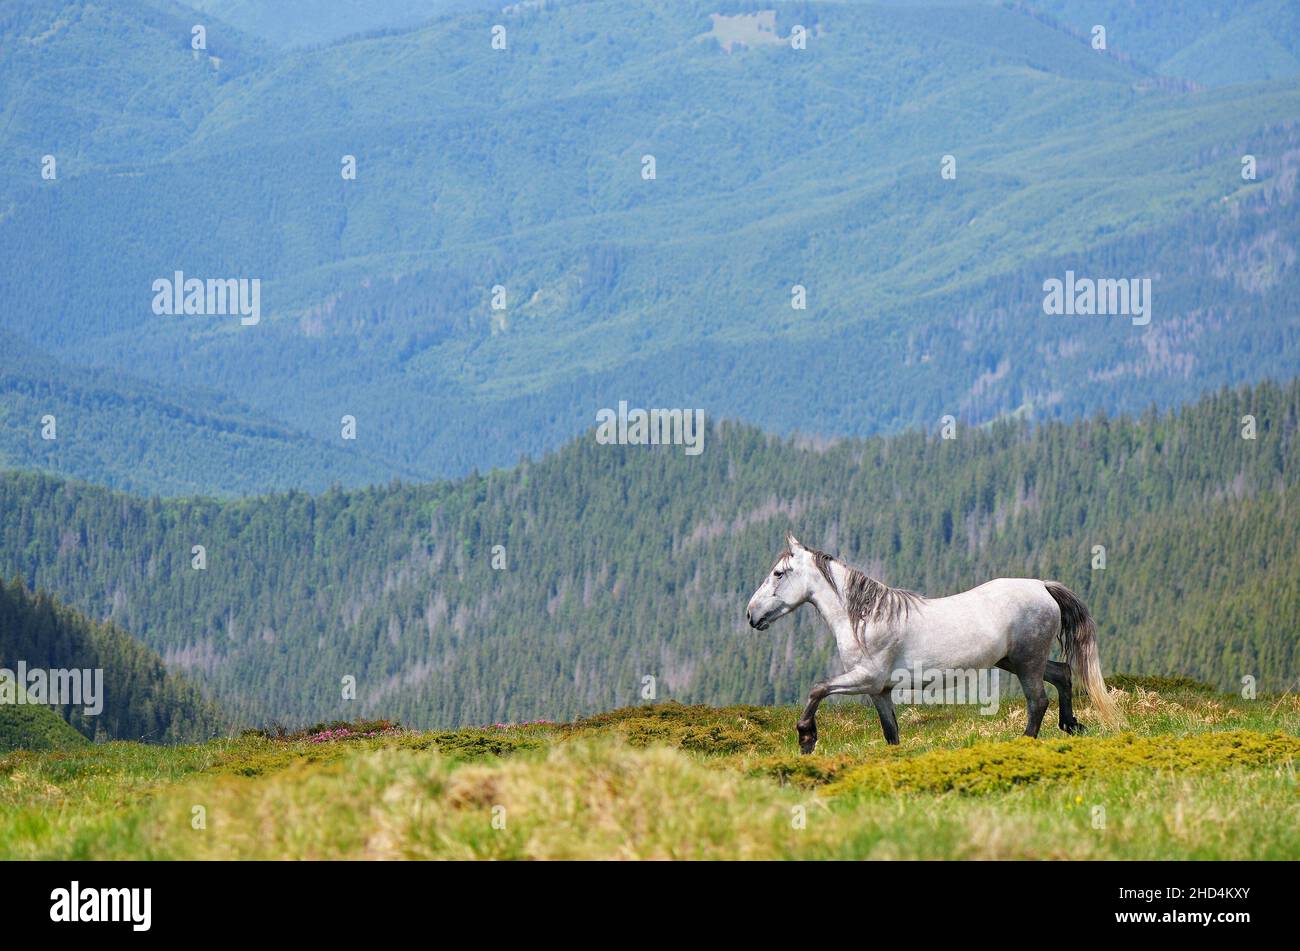 Summer landscape with a gray horse in a mountain valley Stock Photo